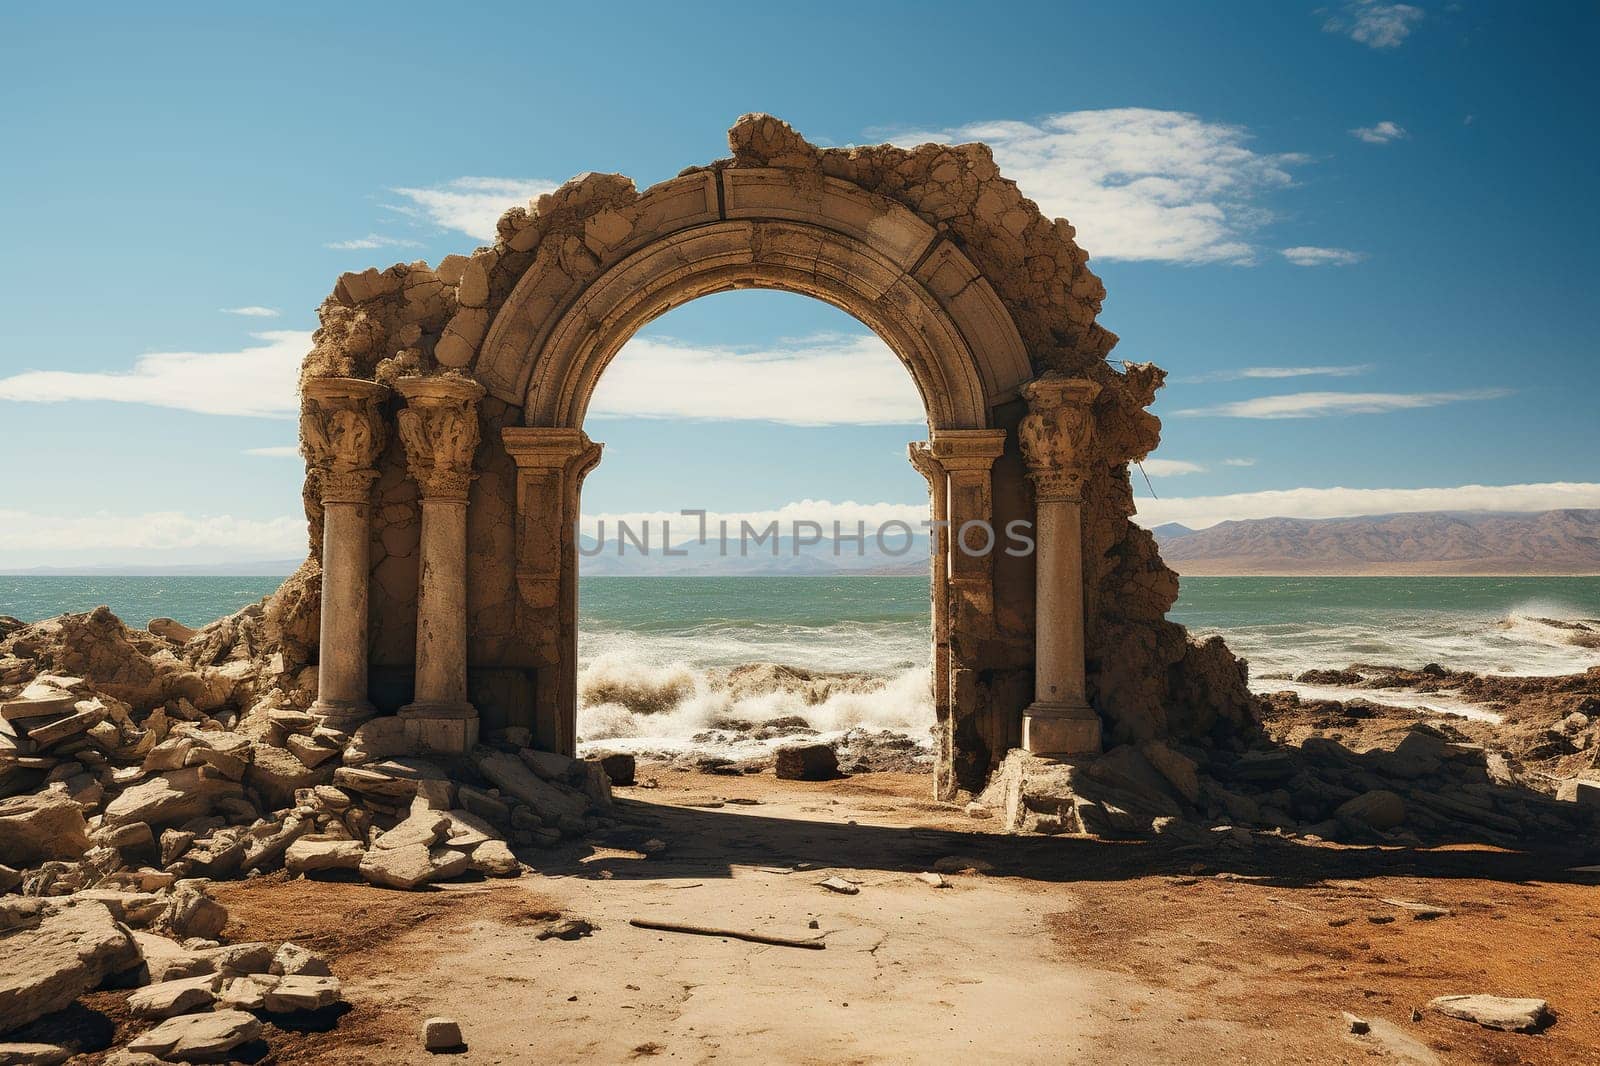 A dilapidated antique arch near the seashore. Generated by artificial intelligence by Vovmar